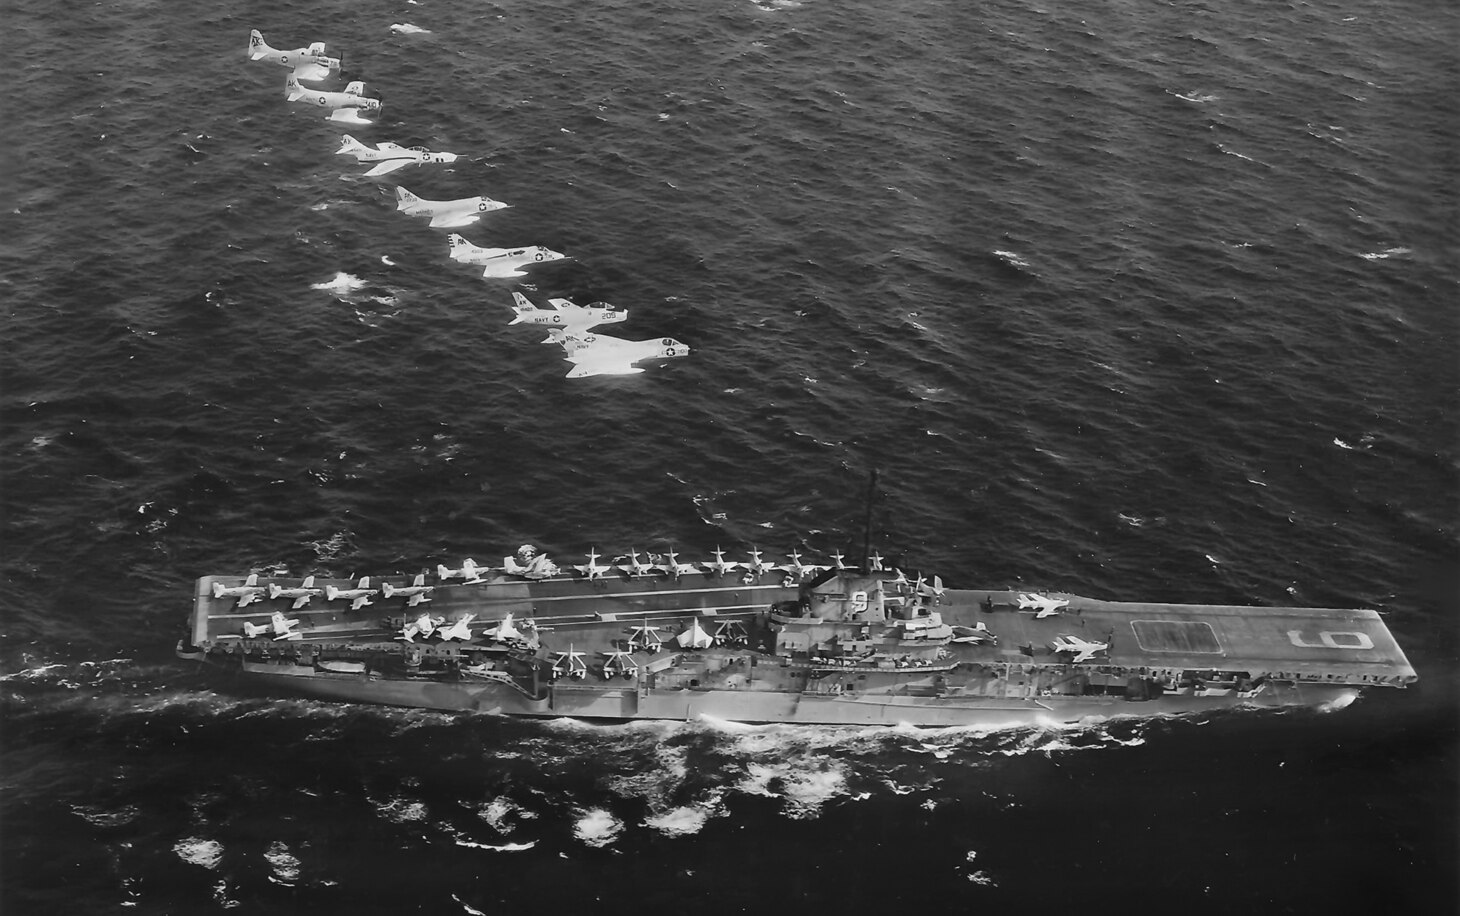 The class lead ship, USS Essex (CV 9), with aircraft of Carrier Air Wing (CVW) 10 on the flight deck and in the air, including AD Skyraiders, and new jets, F4D Skyrays, A4D Skyhawks, FJ Furys and F9F Cougars.